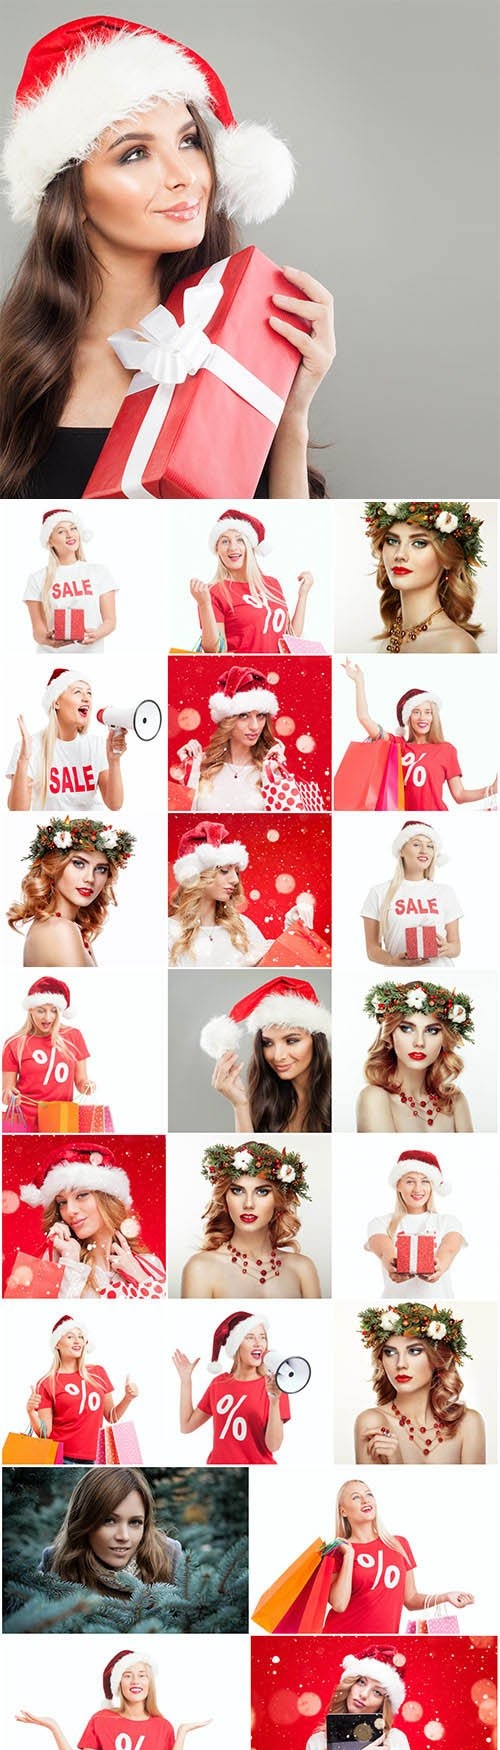 New Year and Christmas stock photos - 74